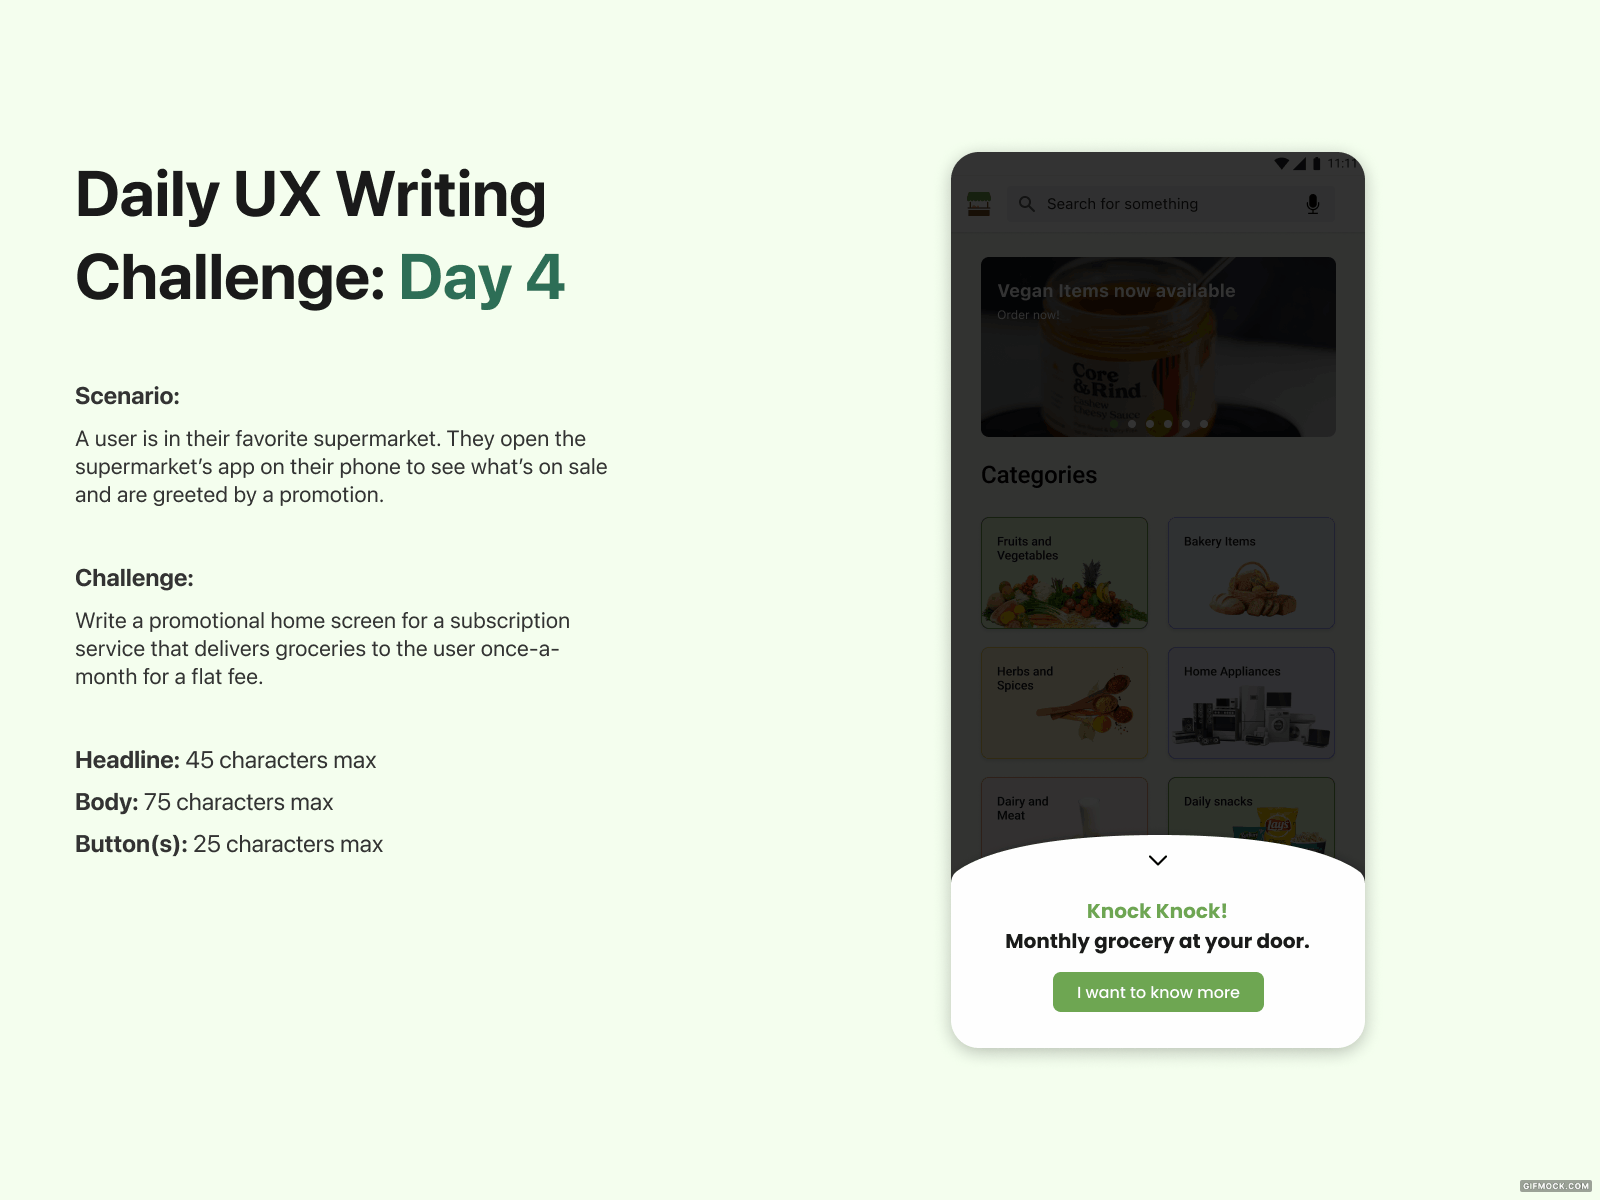 Daily UX Writing Challenge: Day 4